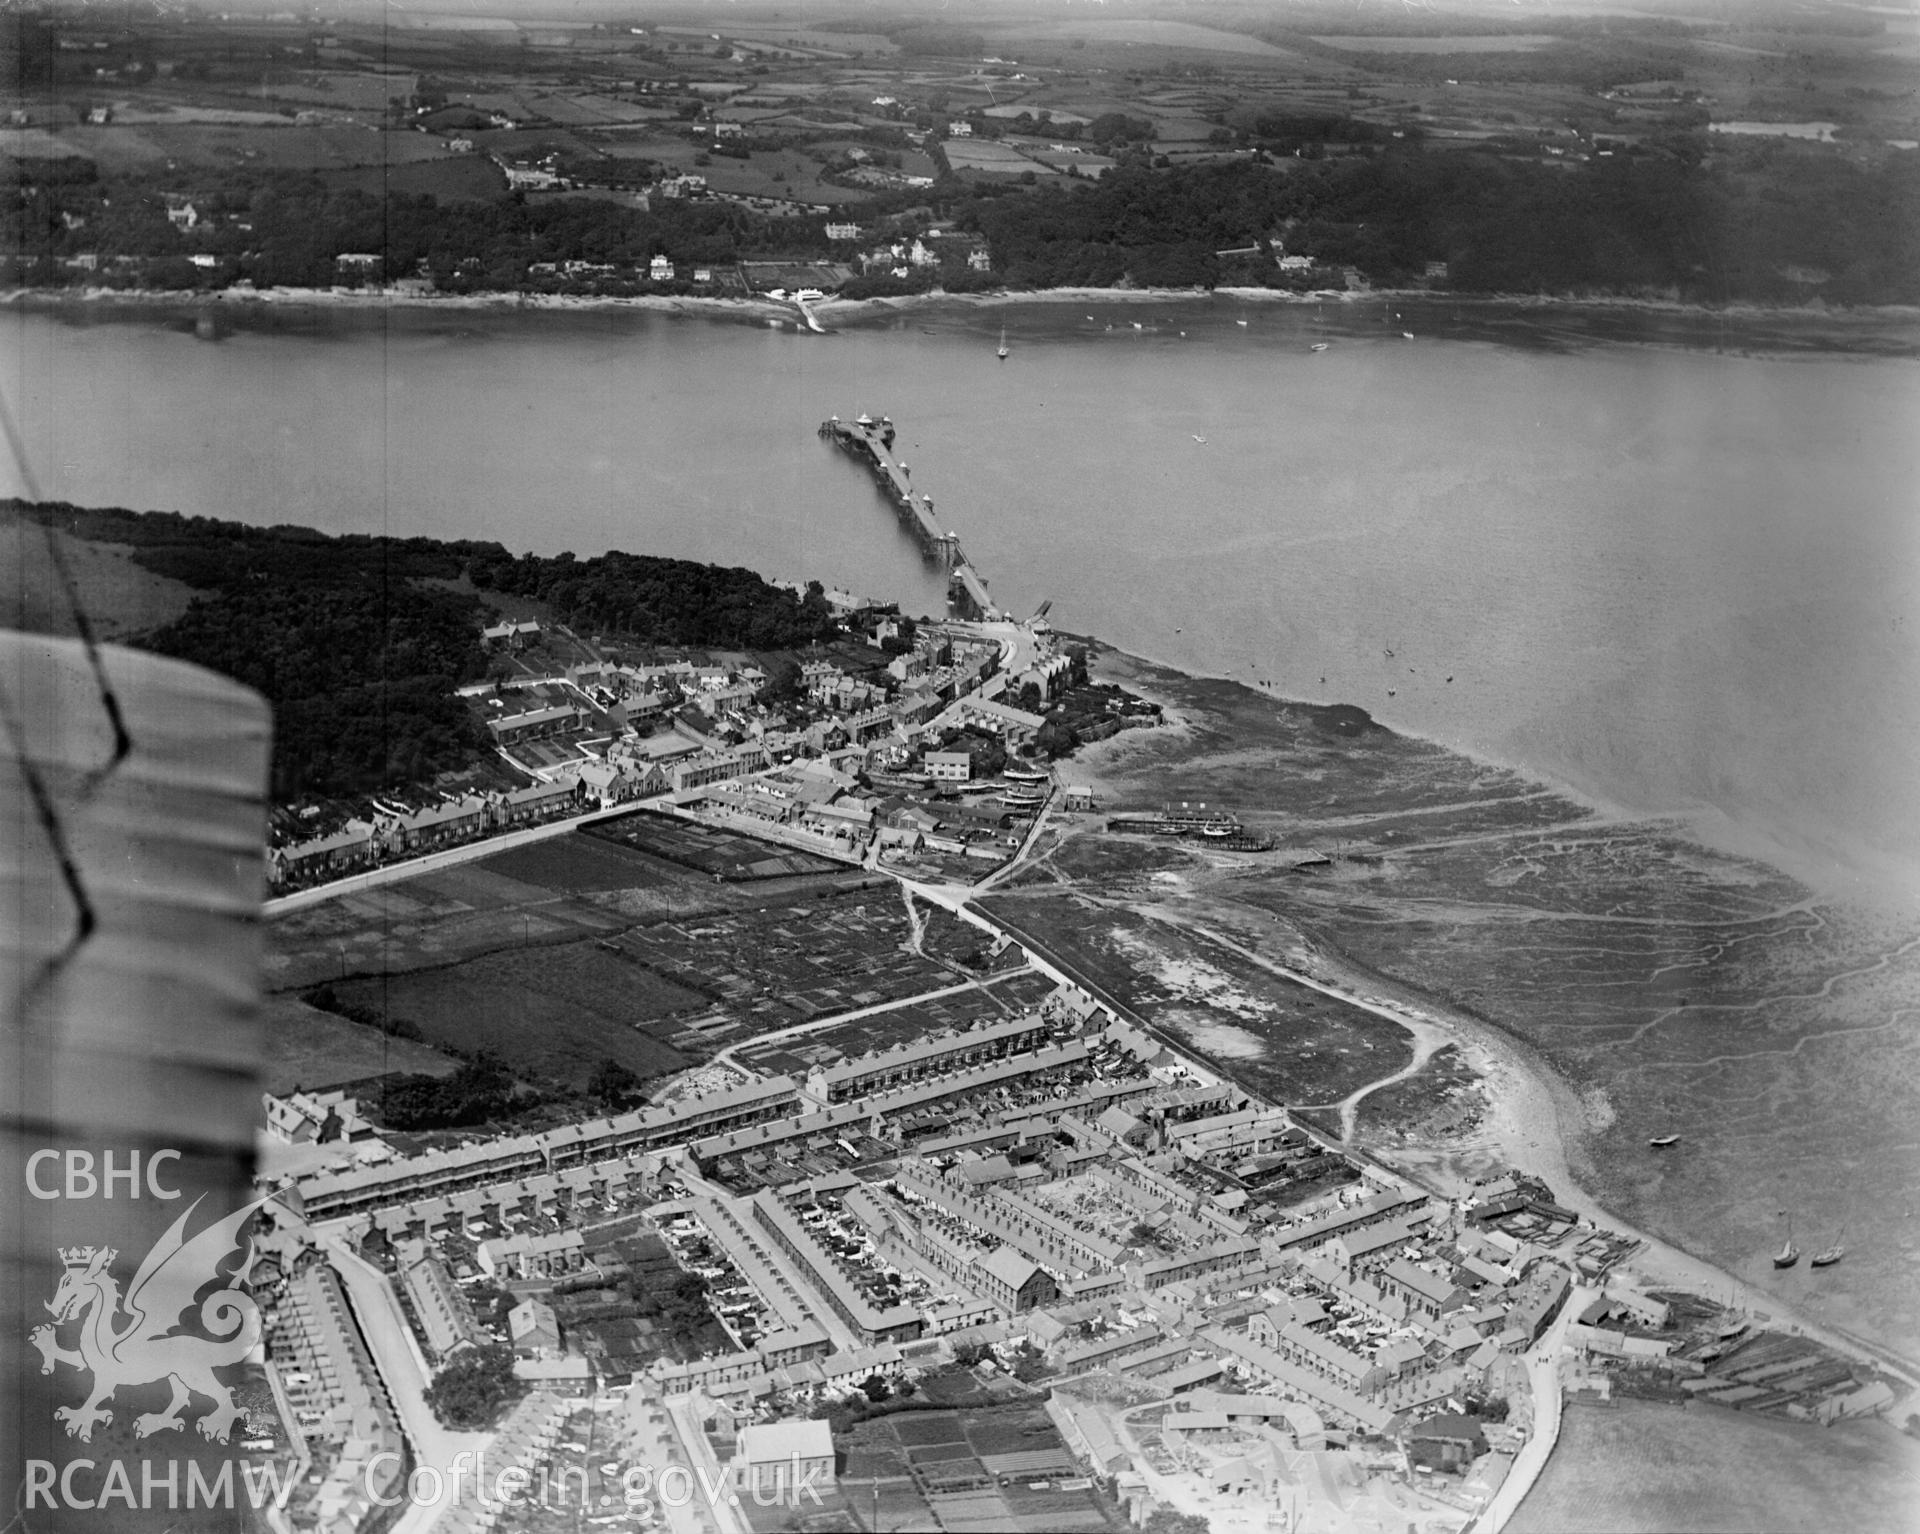 View of Bangor showing pier, oblique aerial view. 5?x4? black and white glass plate negative.